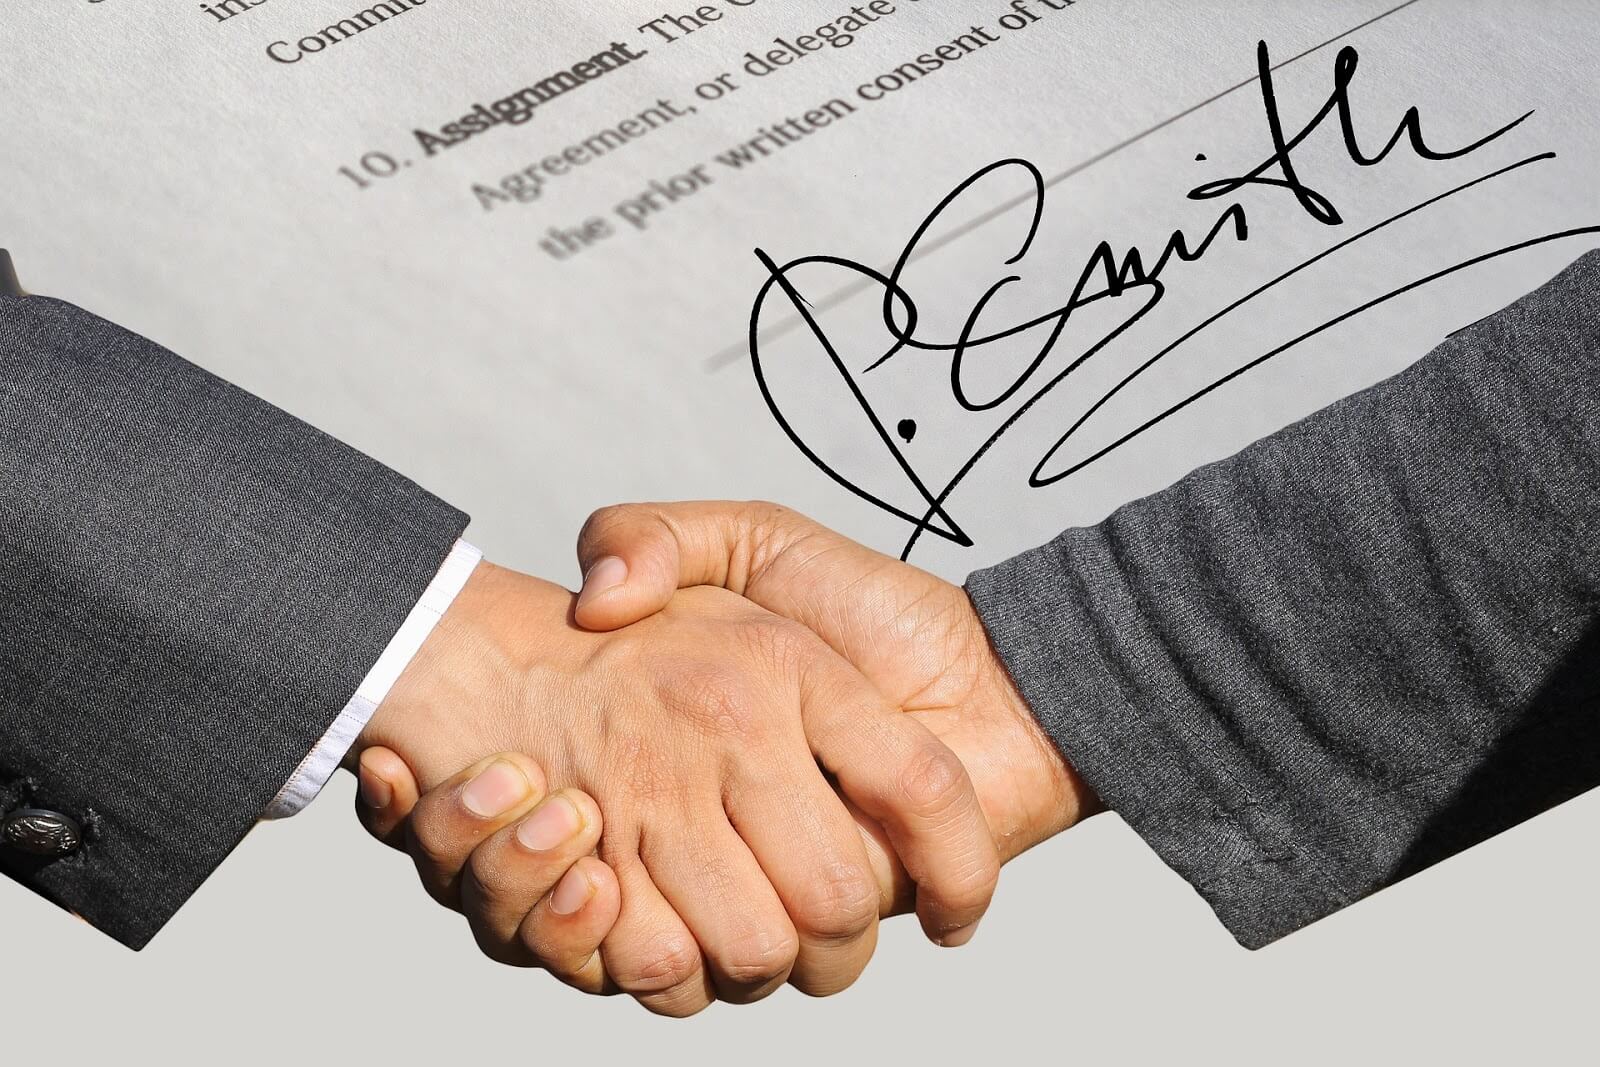 Articles of incorporation: Two men shake hands in front of a signed document